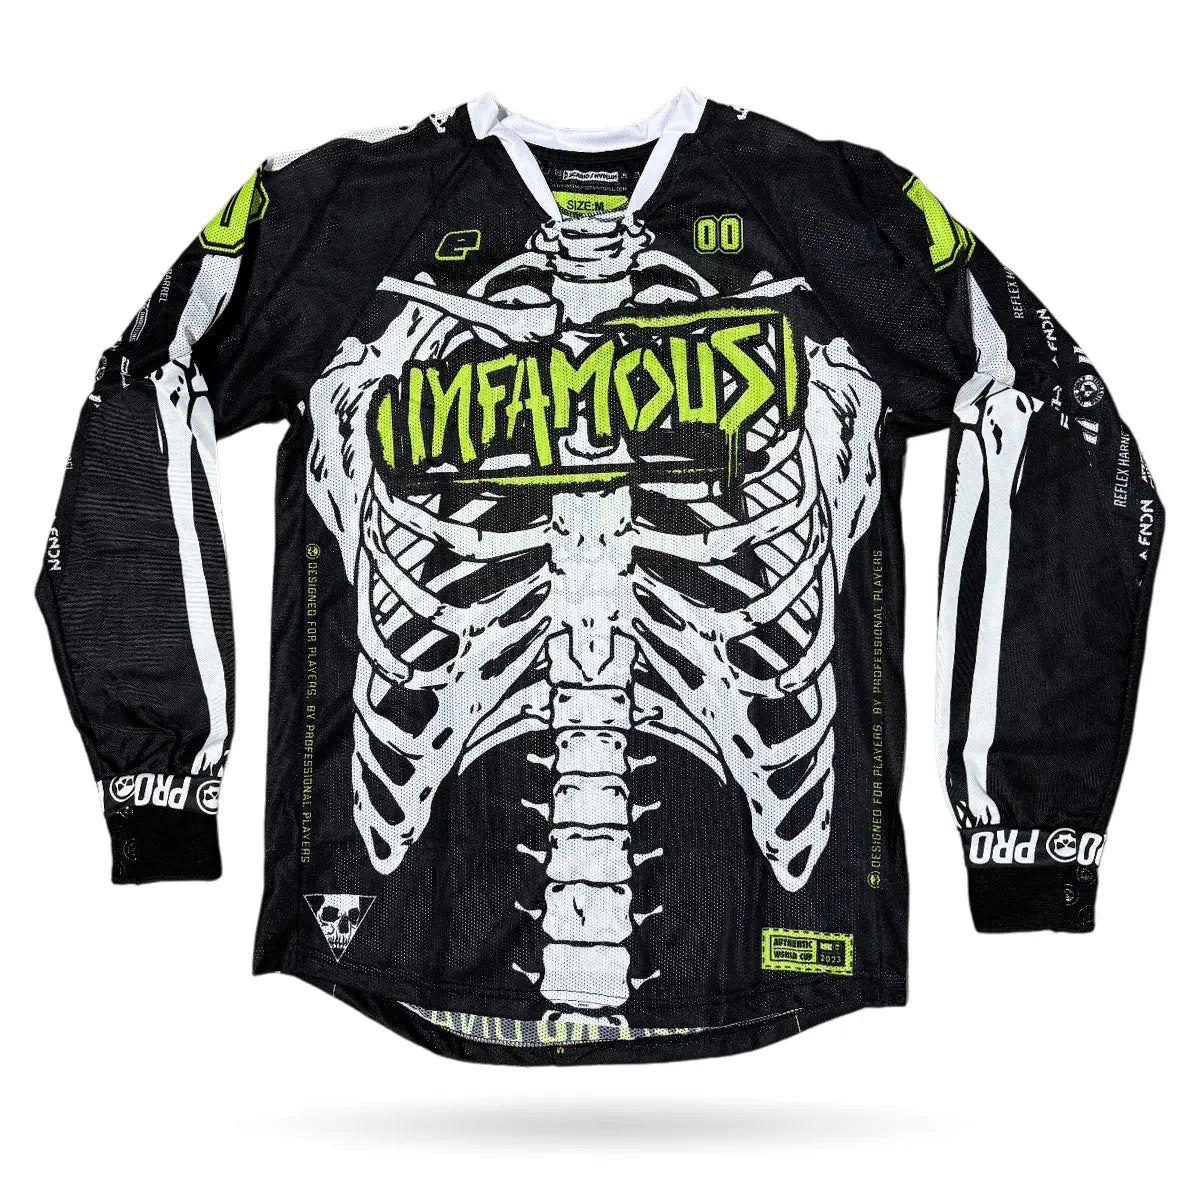 Infamous Jersey - Skeleton World Cup 2023 Infamous Paintball